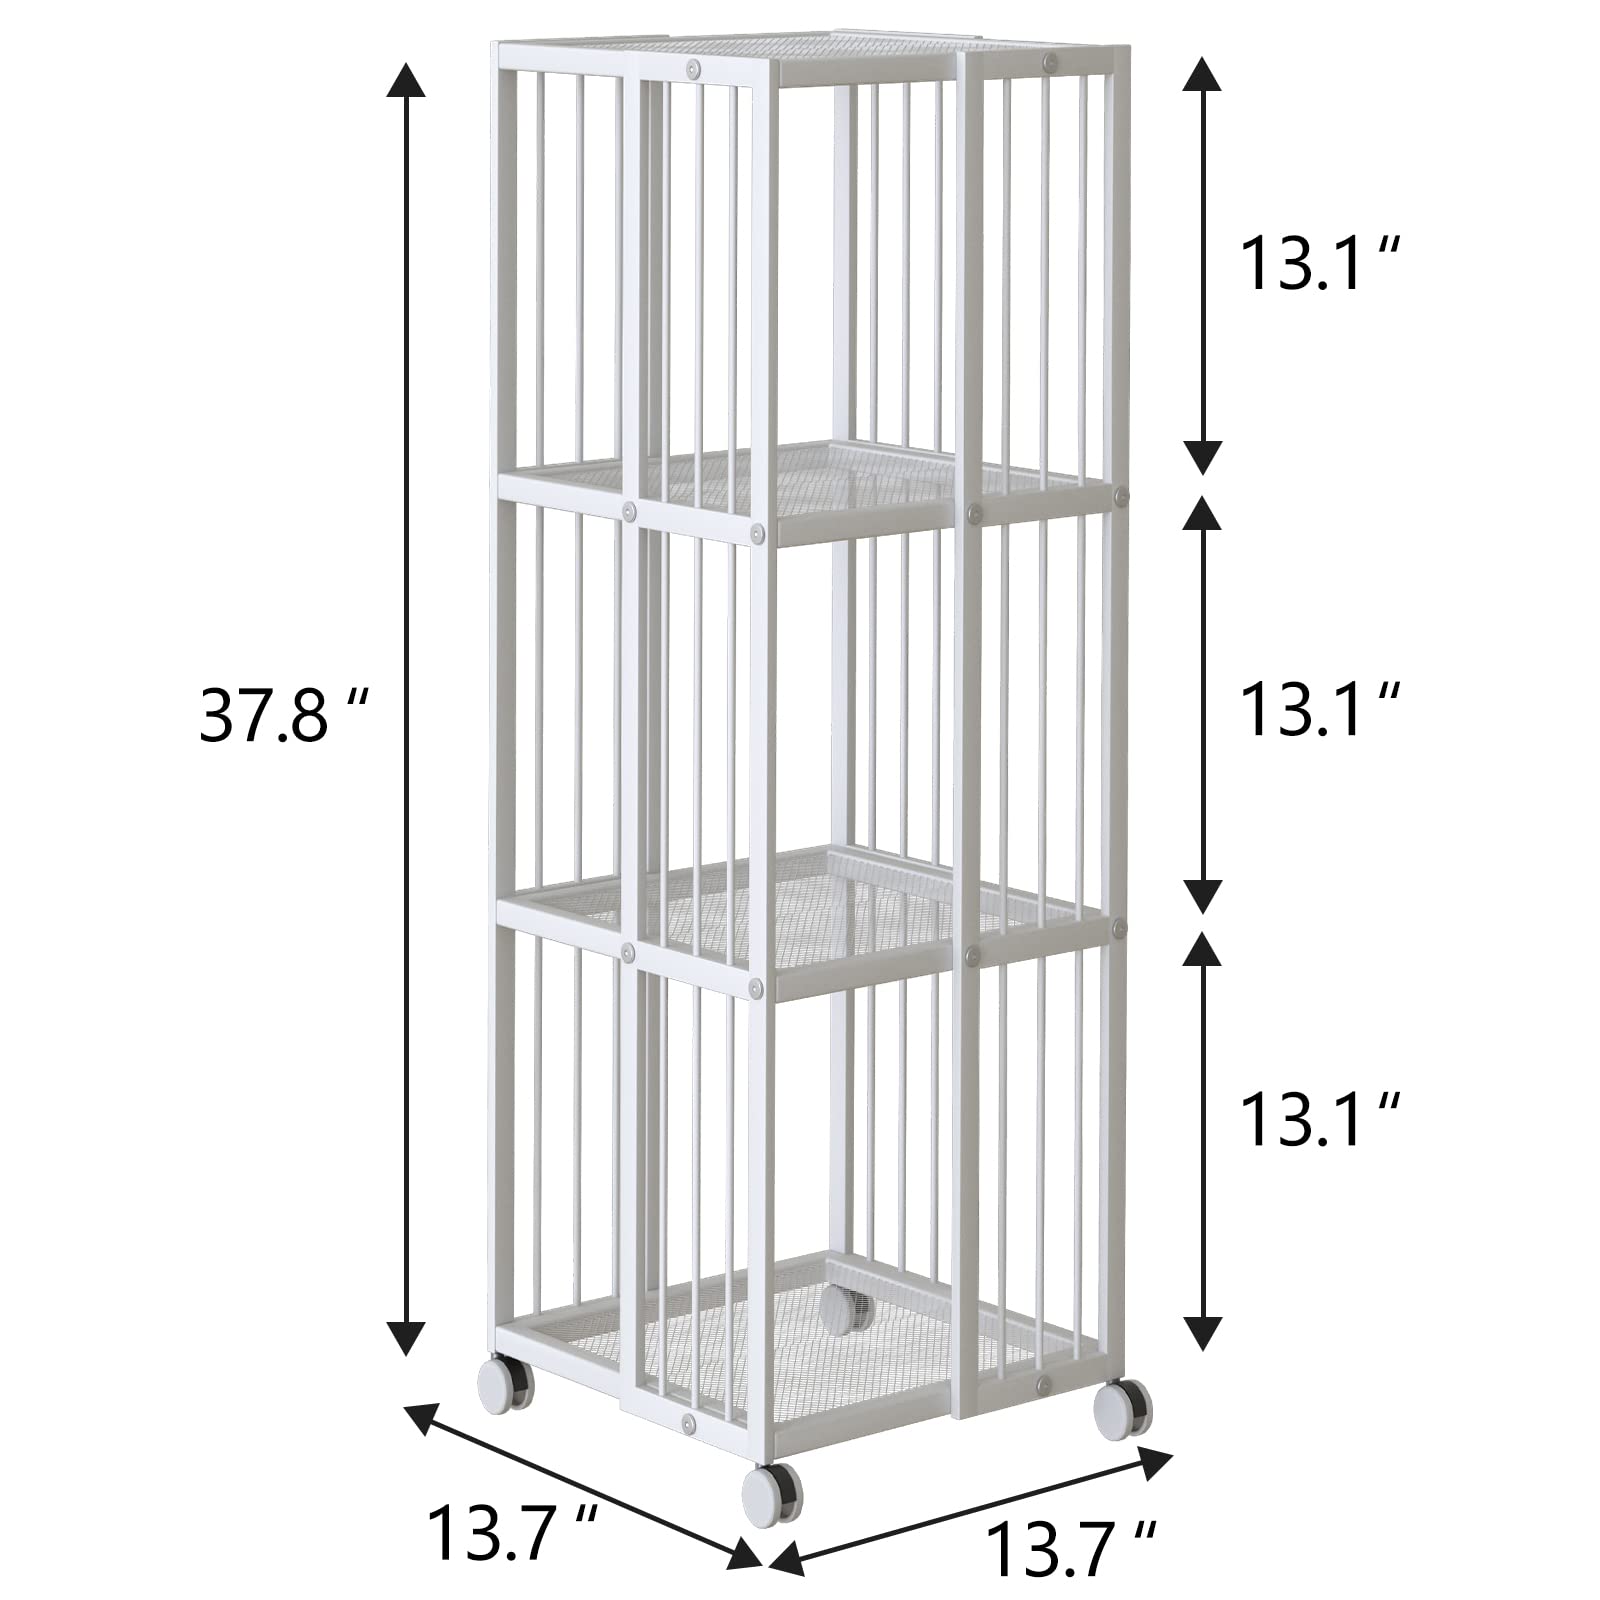 Huhote Rotating Bookcase White 3 Tiers Metal Large Capacity Bookshelf, 360°Cubic for Small Space with Storage and Creative Multi-Layer Shelves,Magazine Books for Bedroom Living Room Study Office